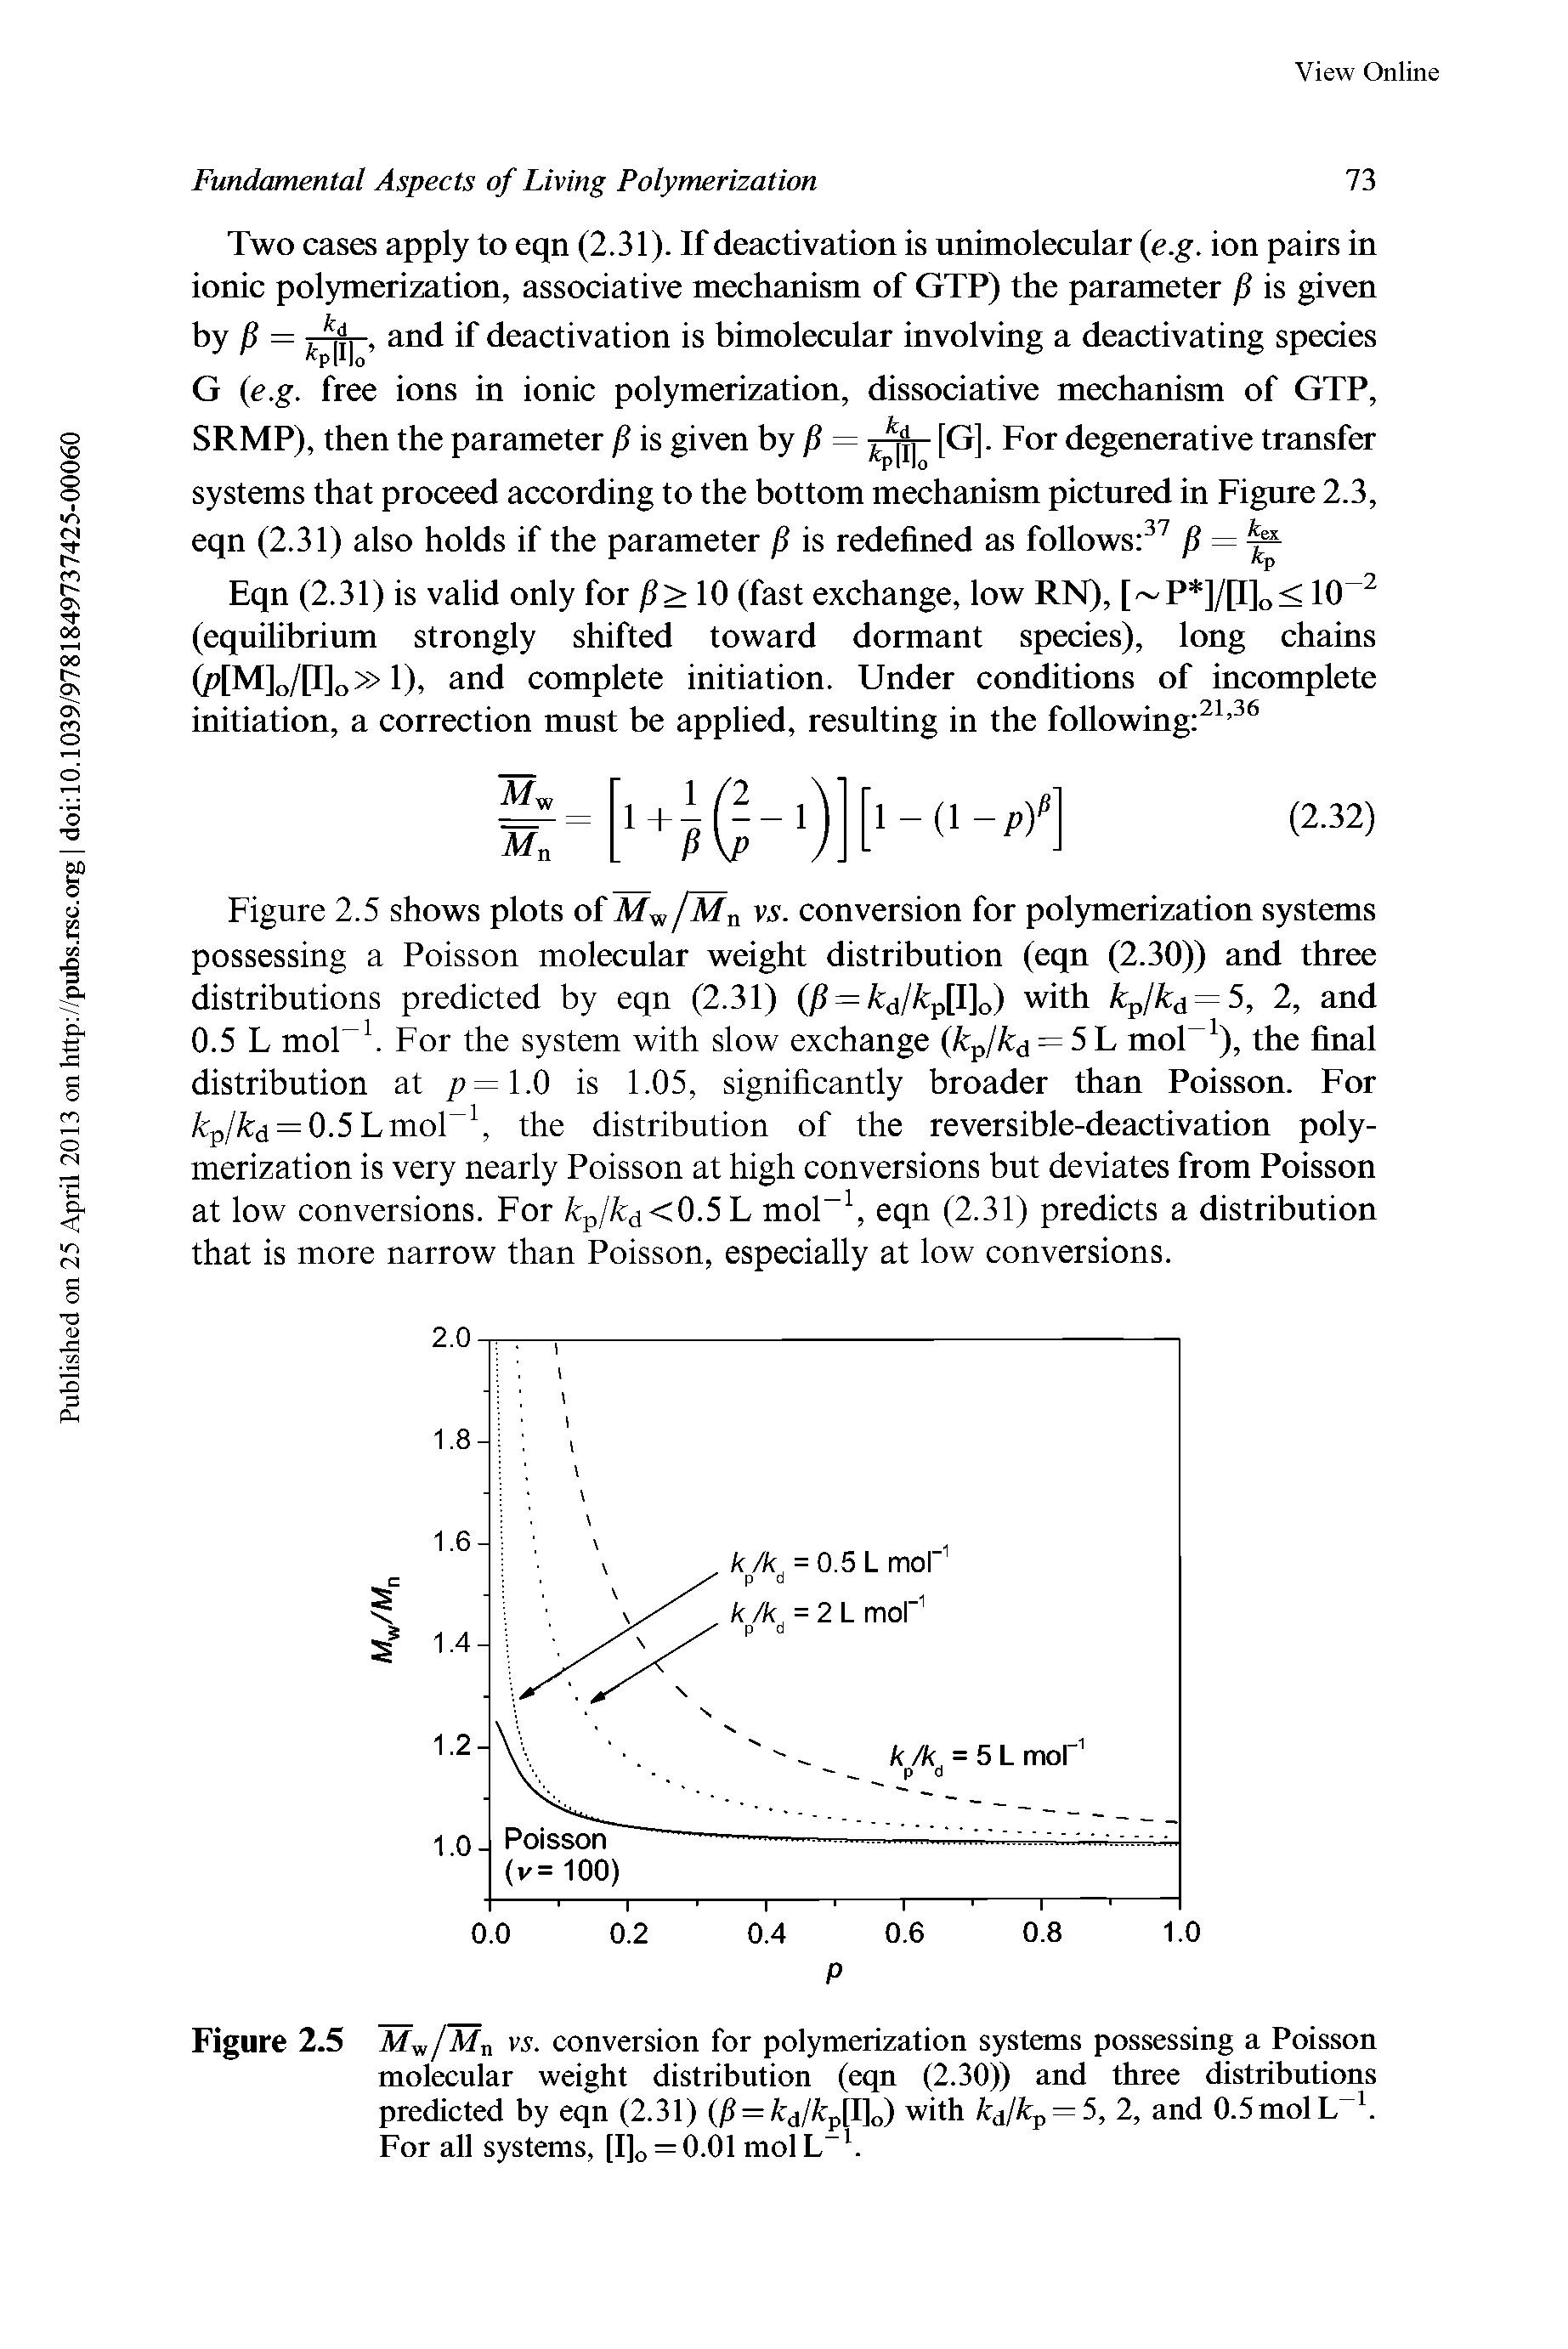 Figure 2.5 M fM conversion for polymerization systems possessing a Poisson molecular weight distribution (eqn (2.30)) and three distributions predicted by eqn (2.31) (p = kJkp I]o) with kjkp = 5, 2, and 0.5 mol L . For all systems, [I]o = 0.01 molL h...